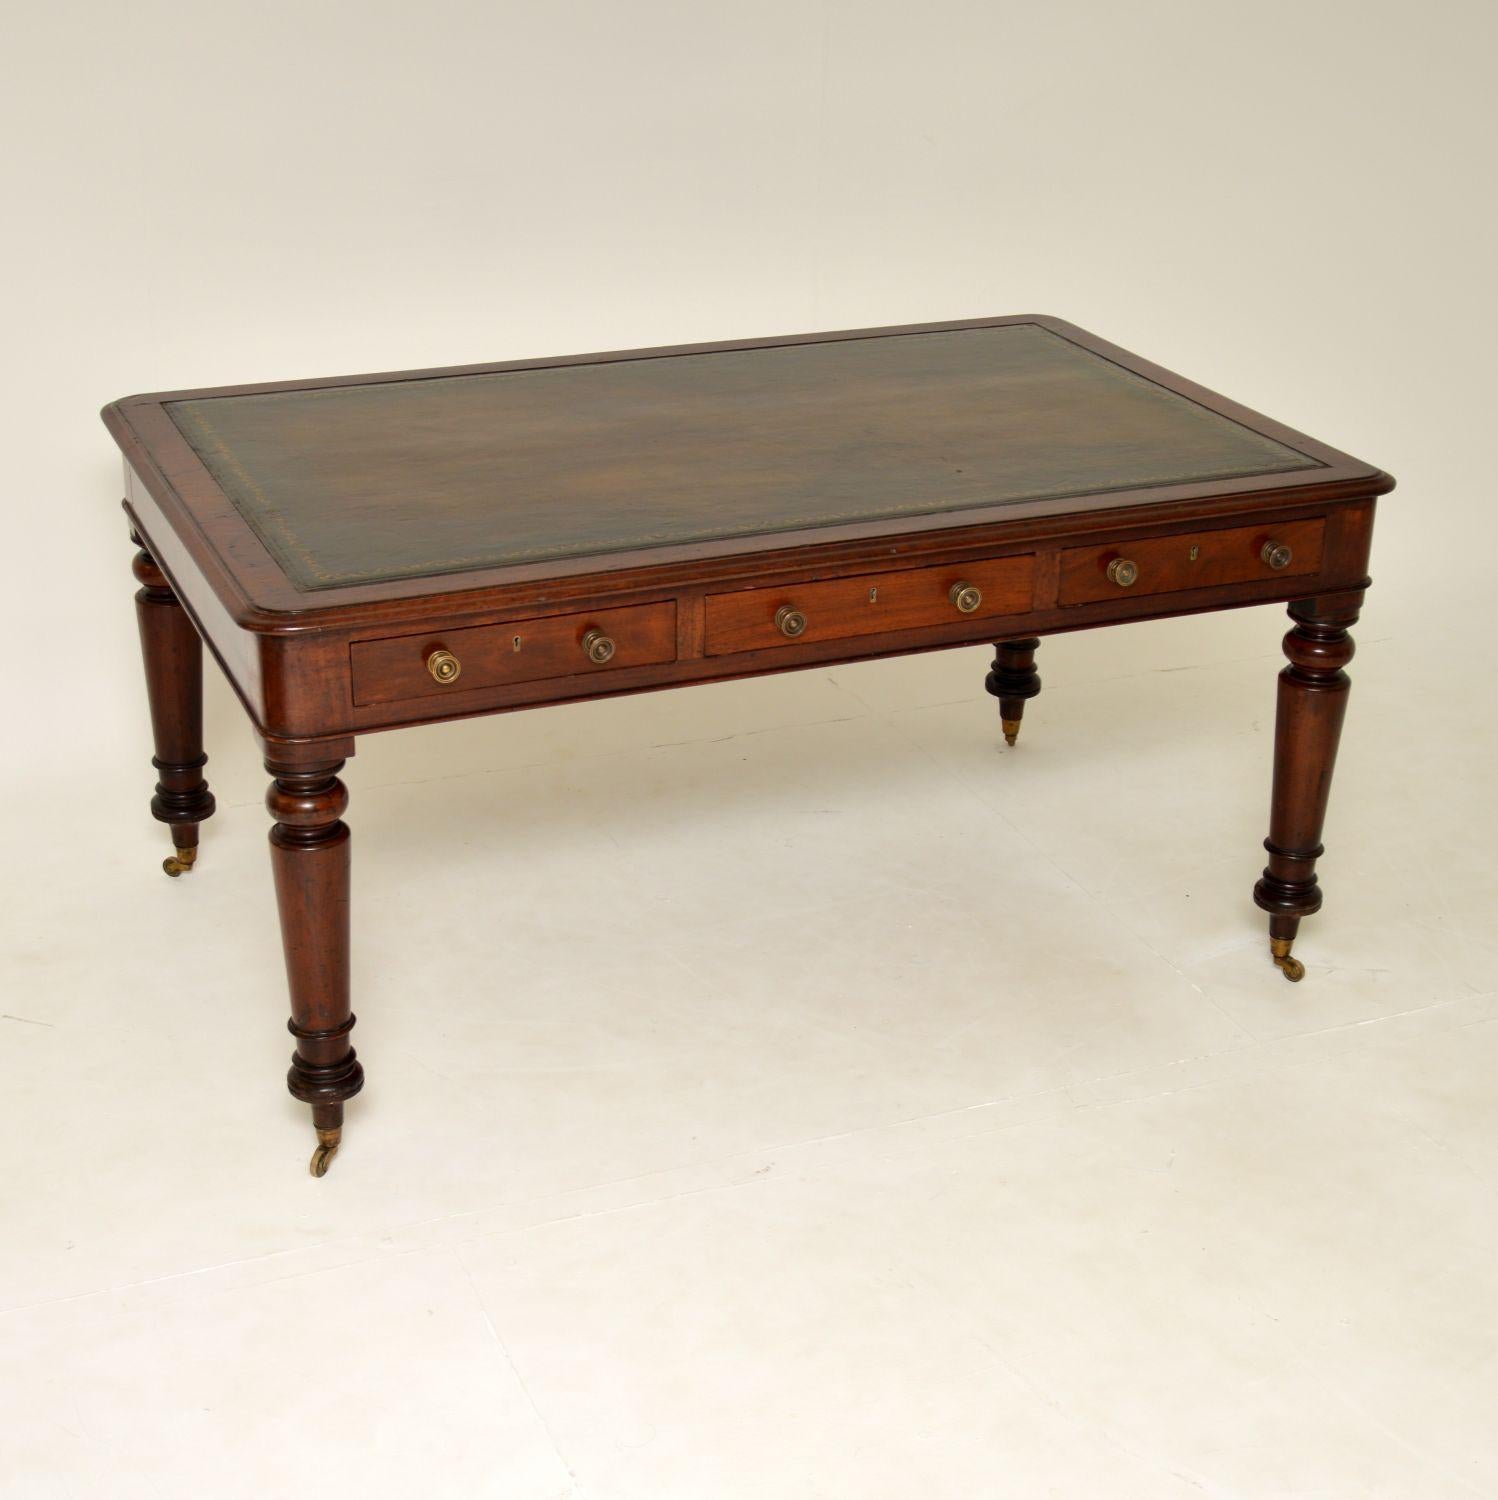 A large and beautiful antique early Victorian period partners writing desk in solid wood. This was made in England, it dates from around 1840-1860.

It is of superb quality and is a great size, this is finished identically back and front, with